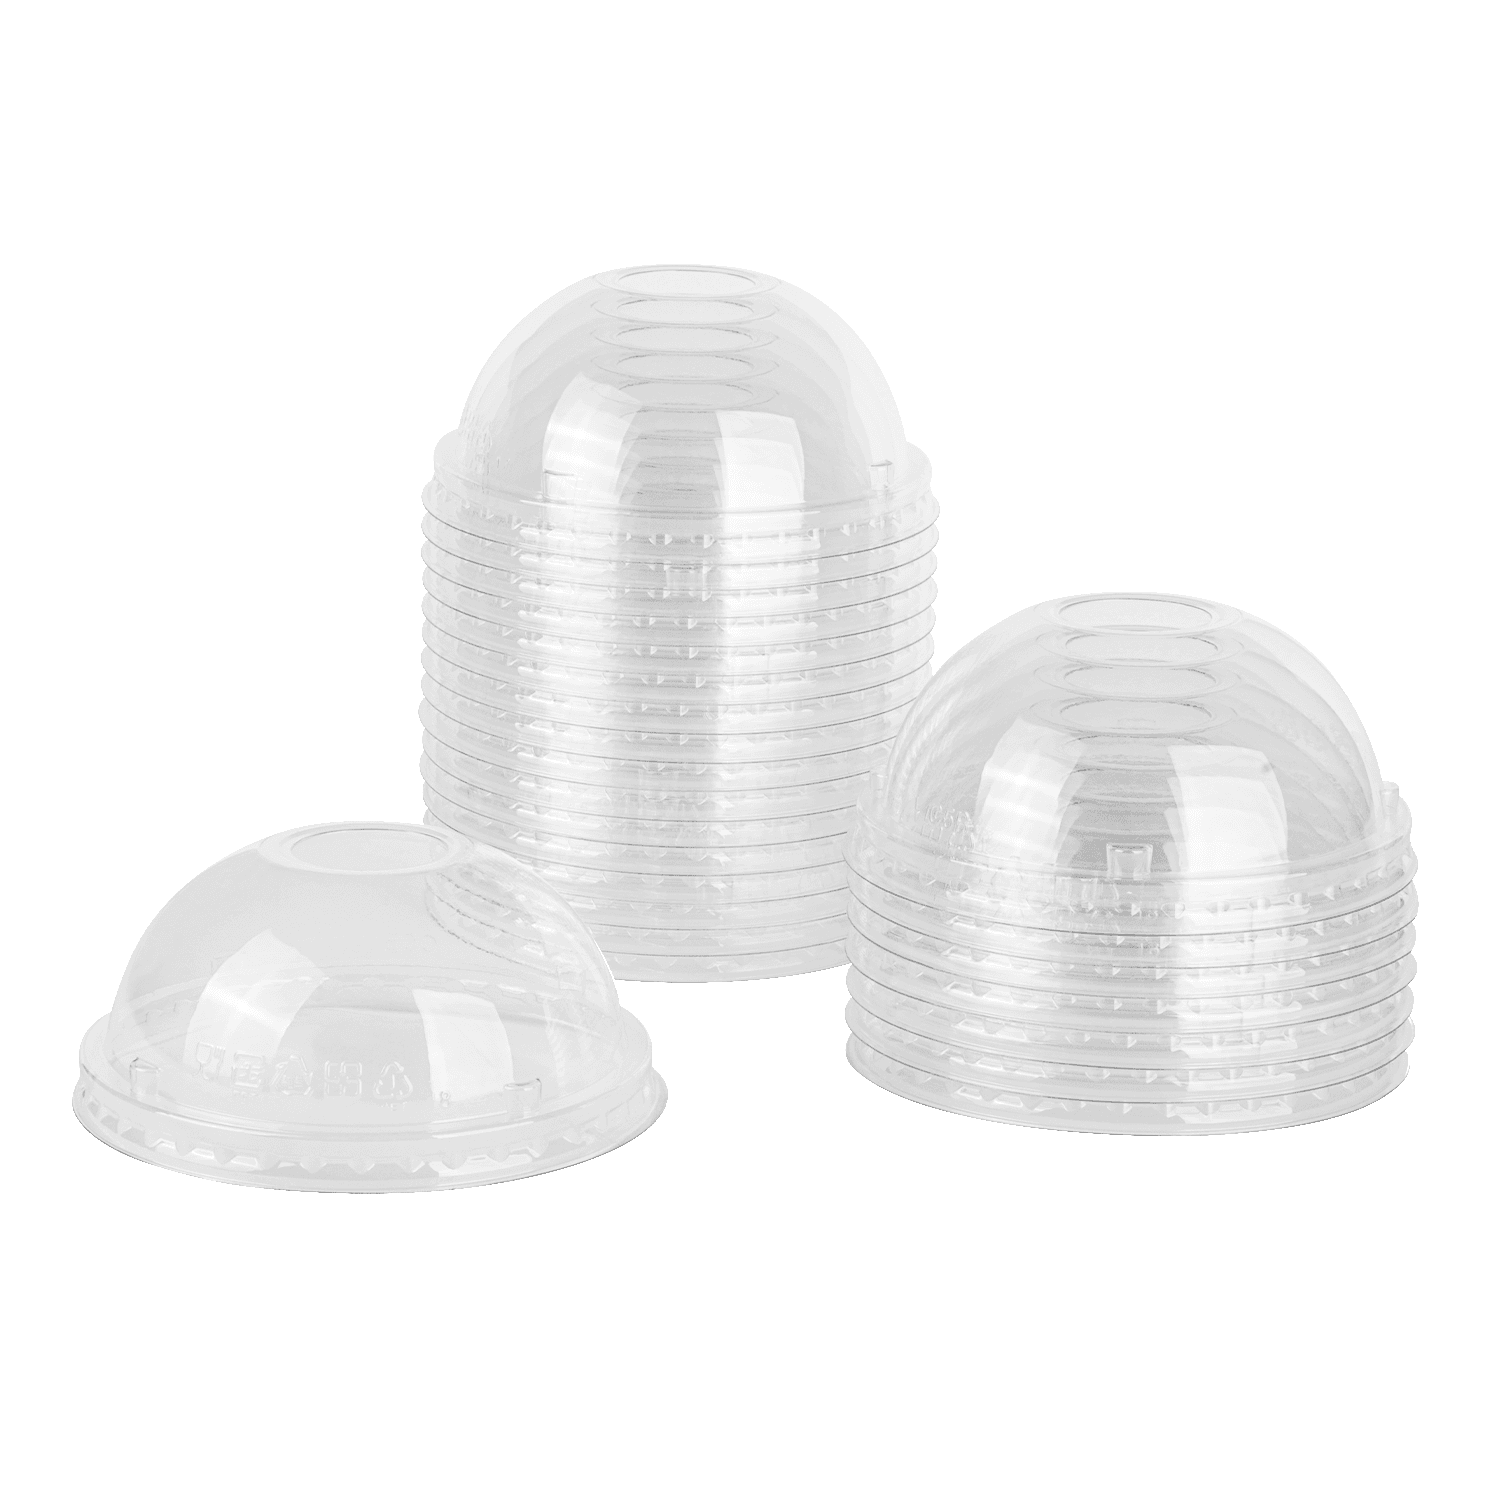 Clear Karat 95mm PP Plastic Dome Lids stacked